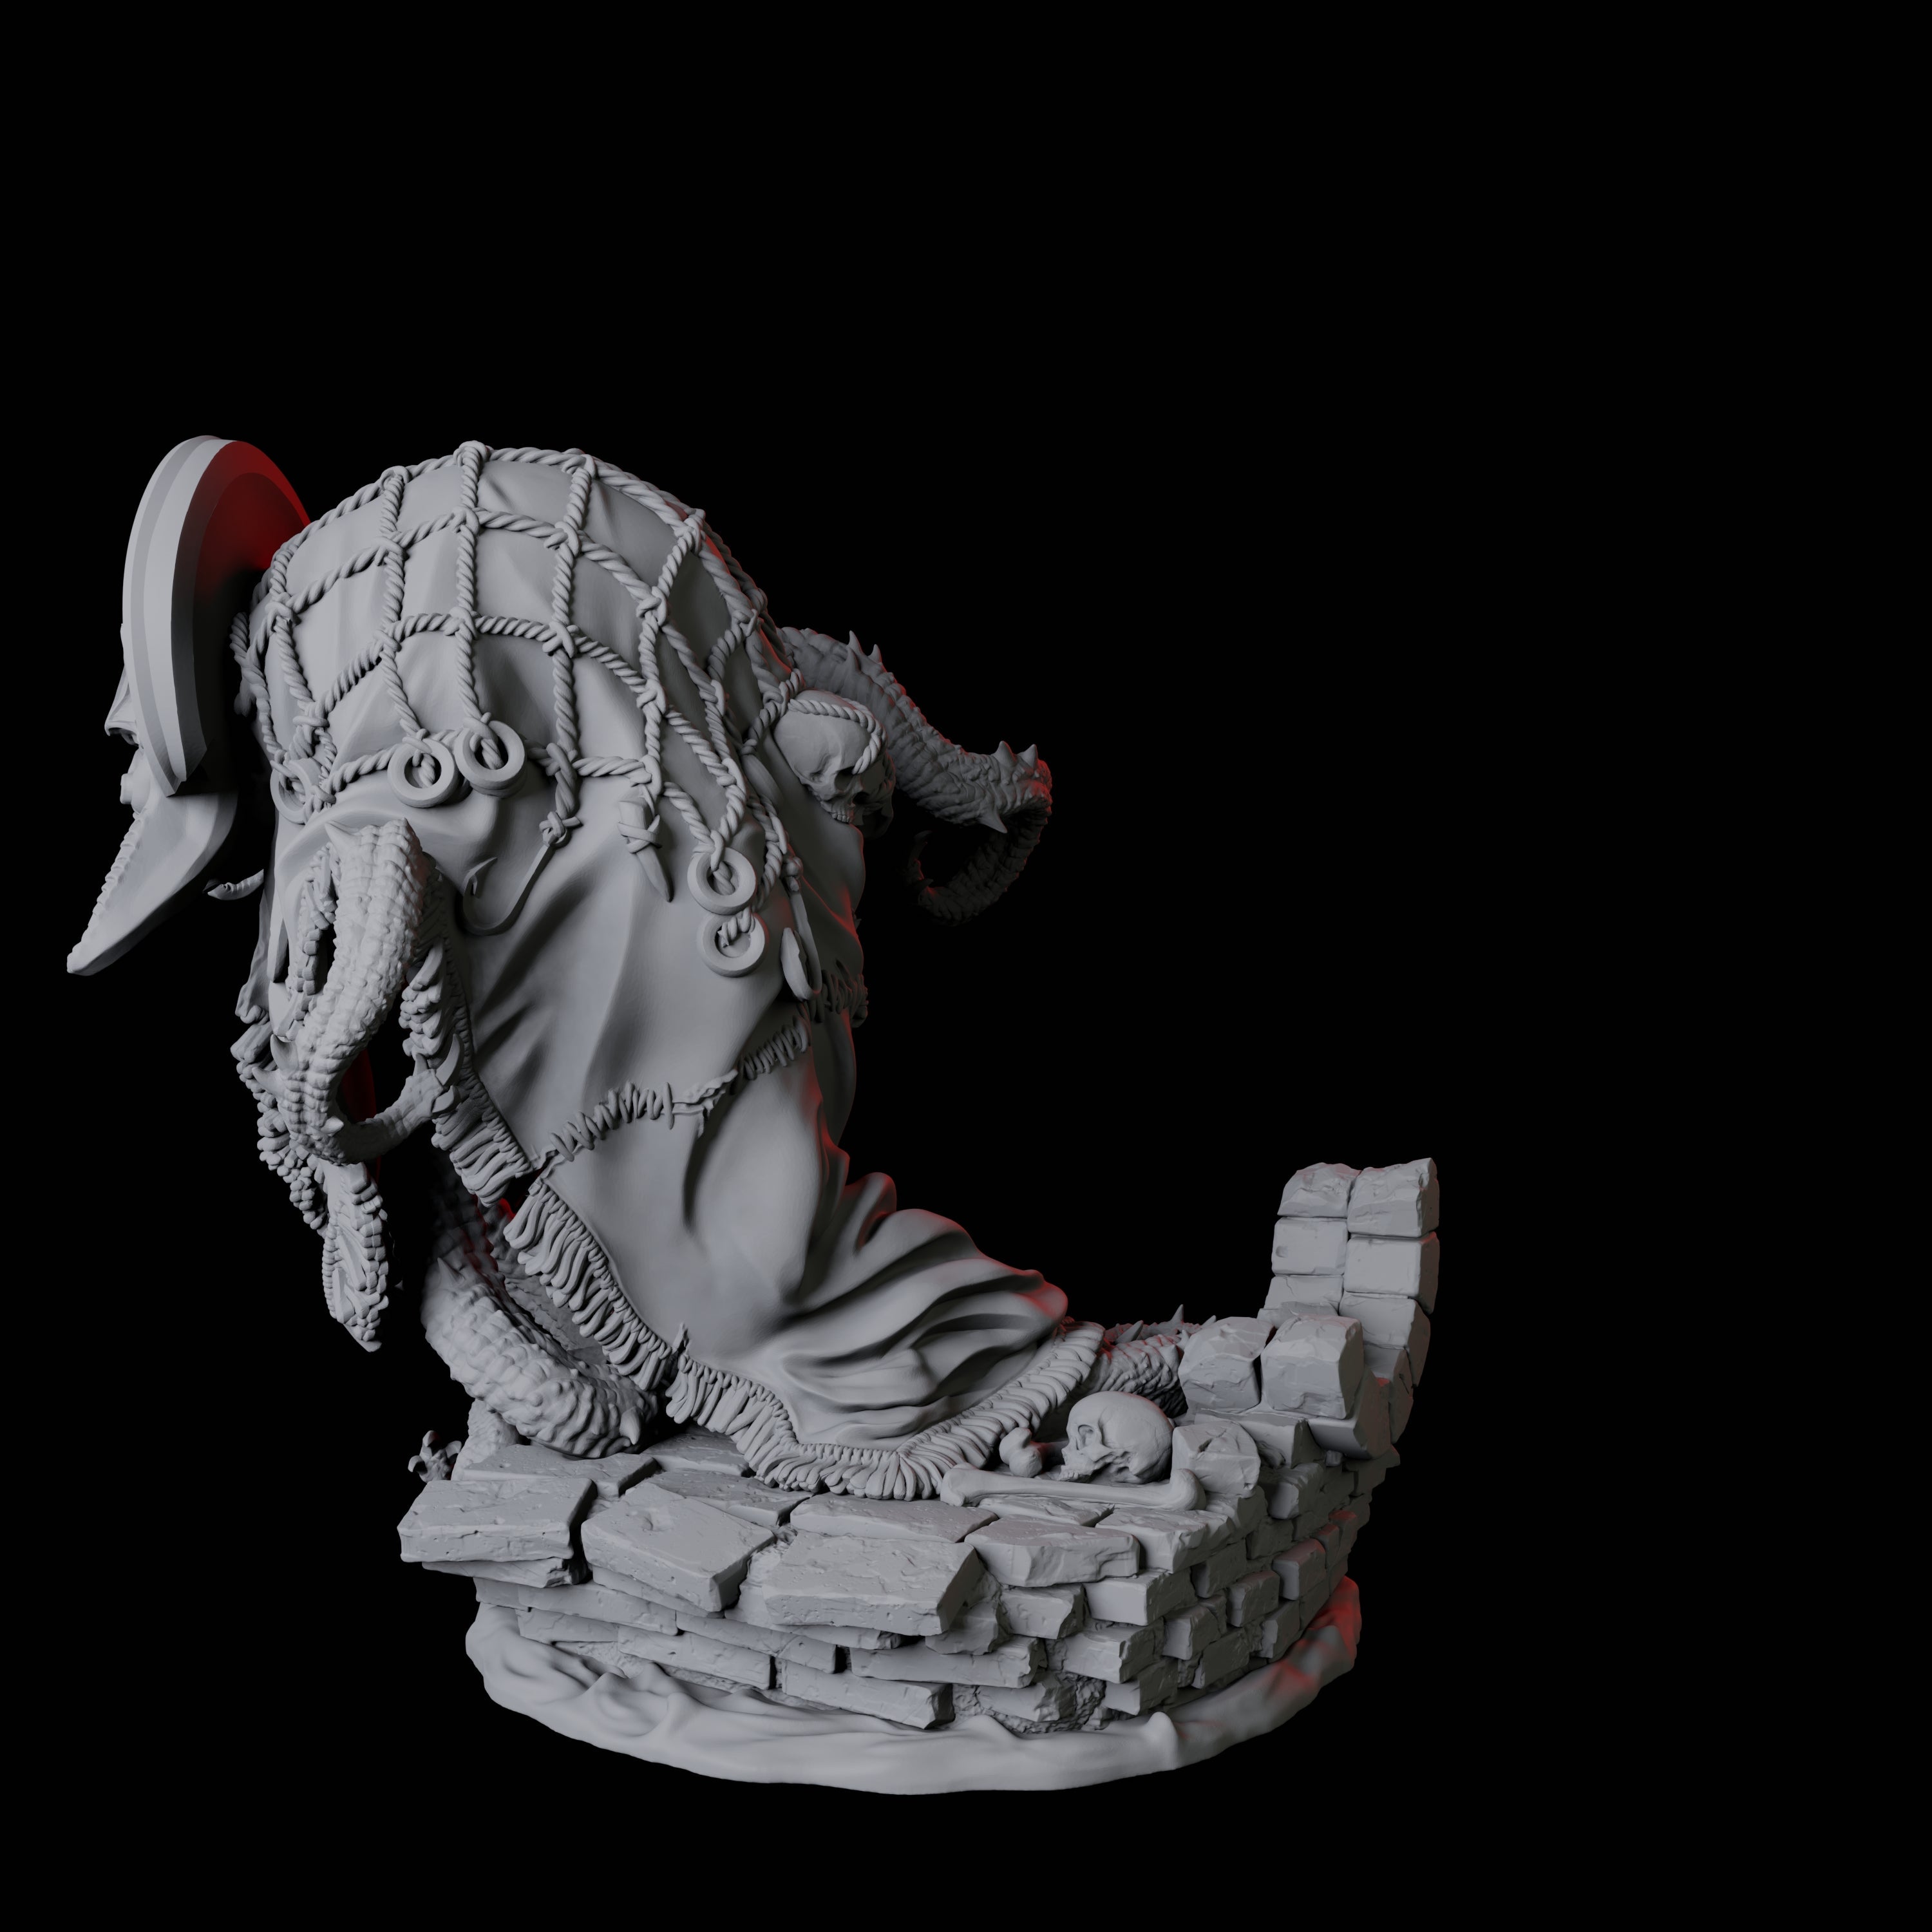 Masked Grell Miniature for Dungeons and Dragons, Pathfinder or other TTRPGs